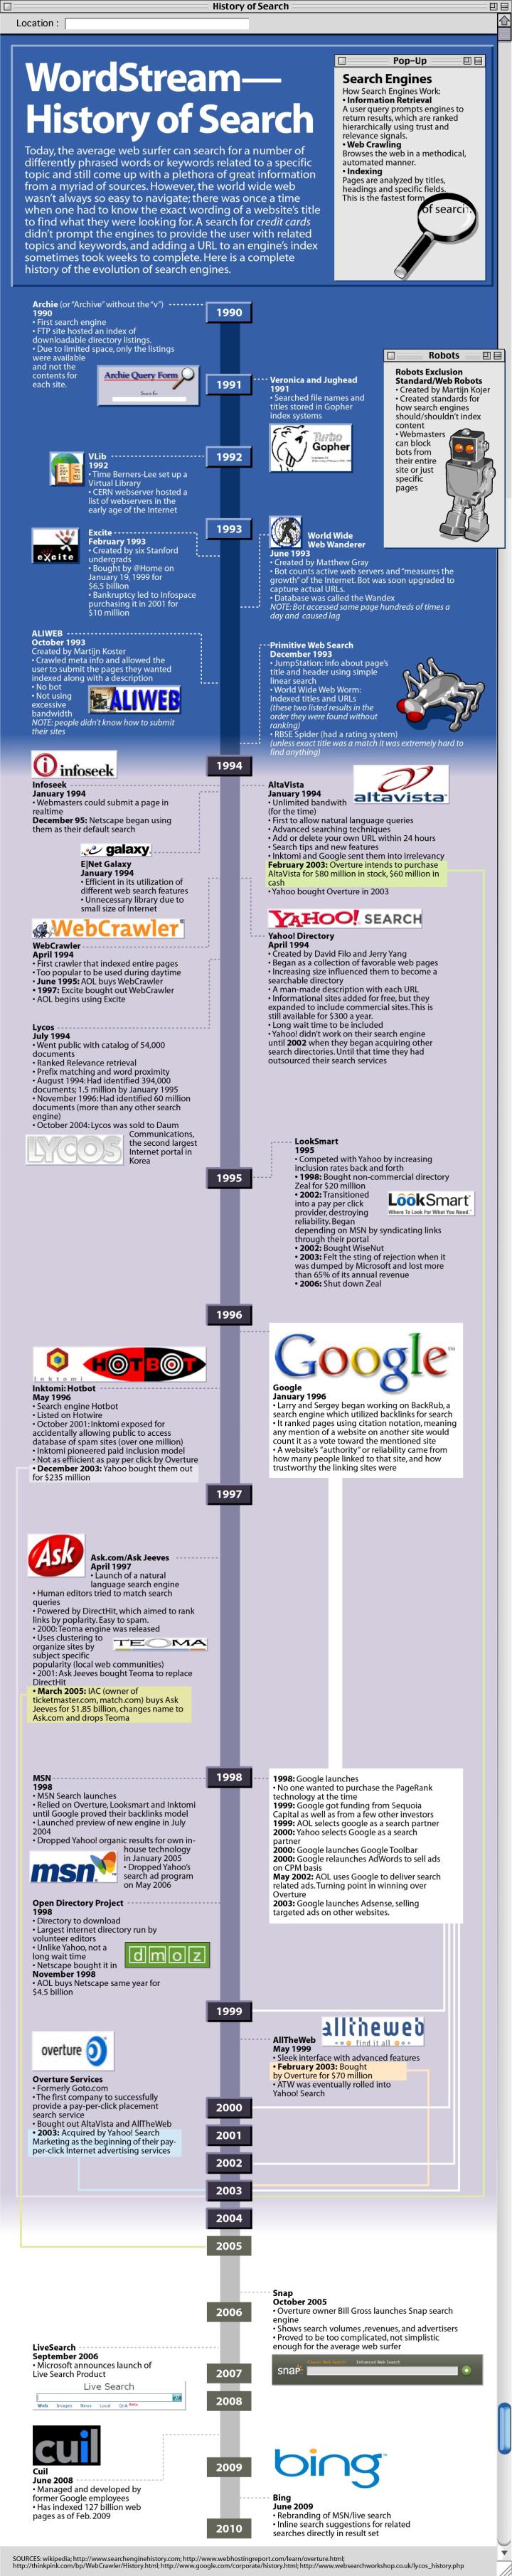 Timeline of Internet Search Engines